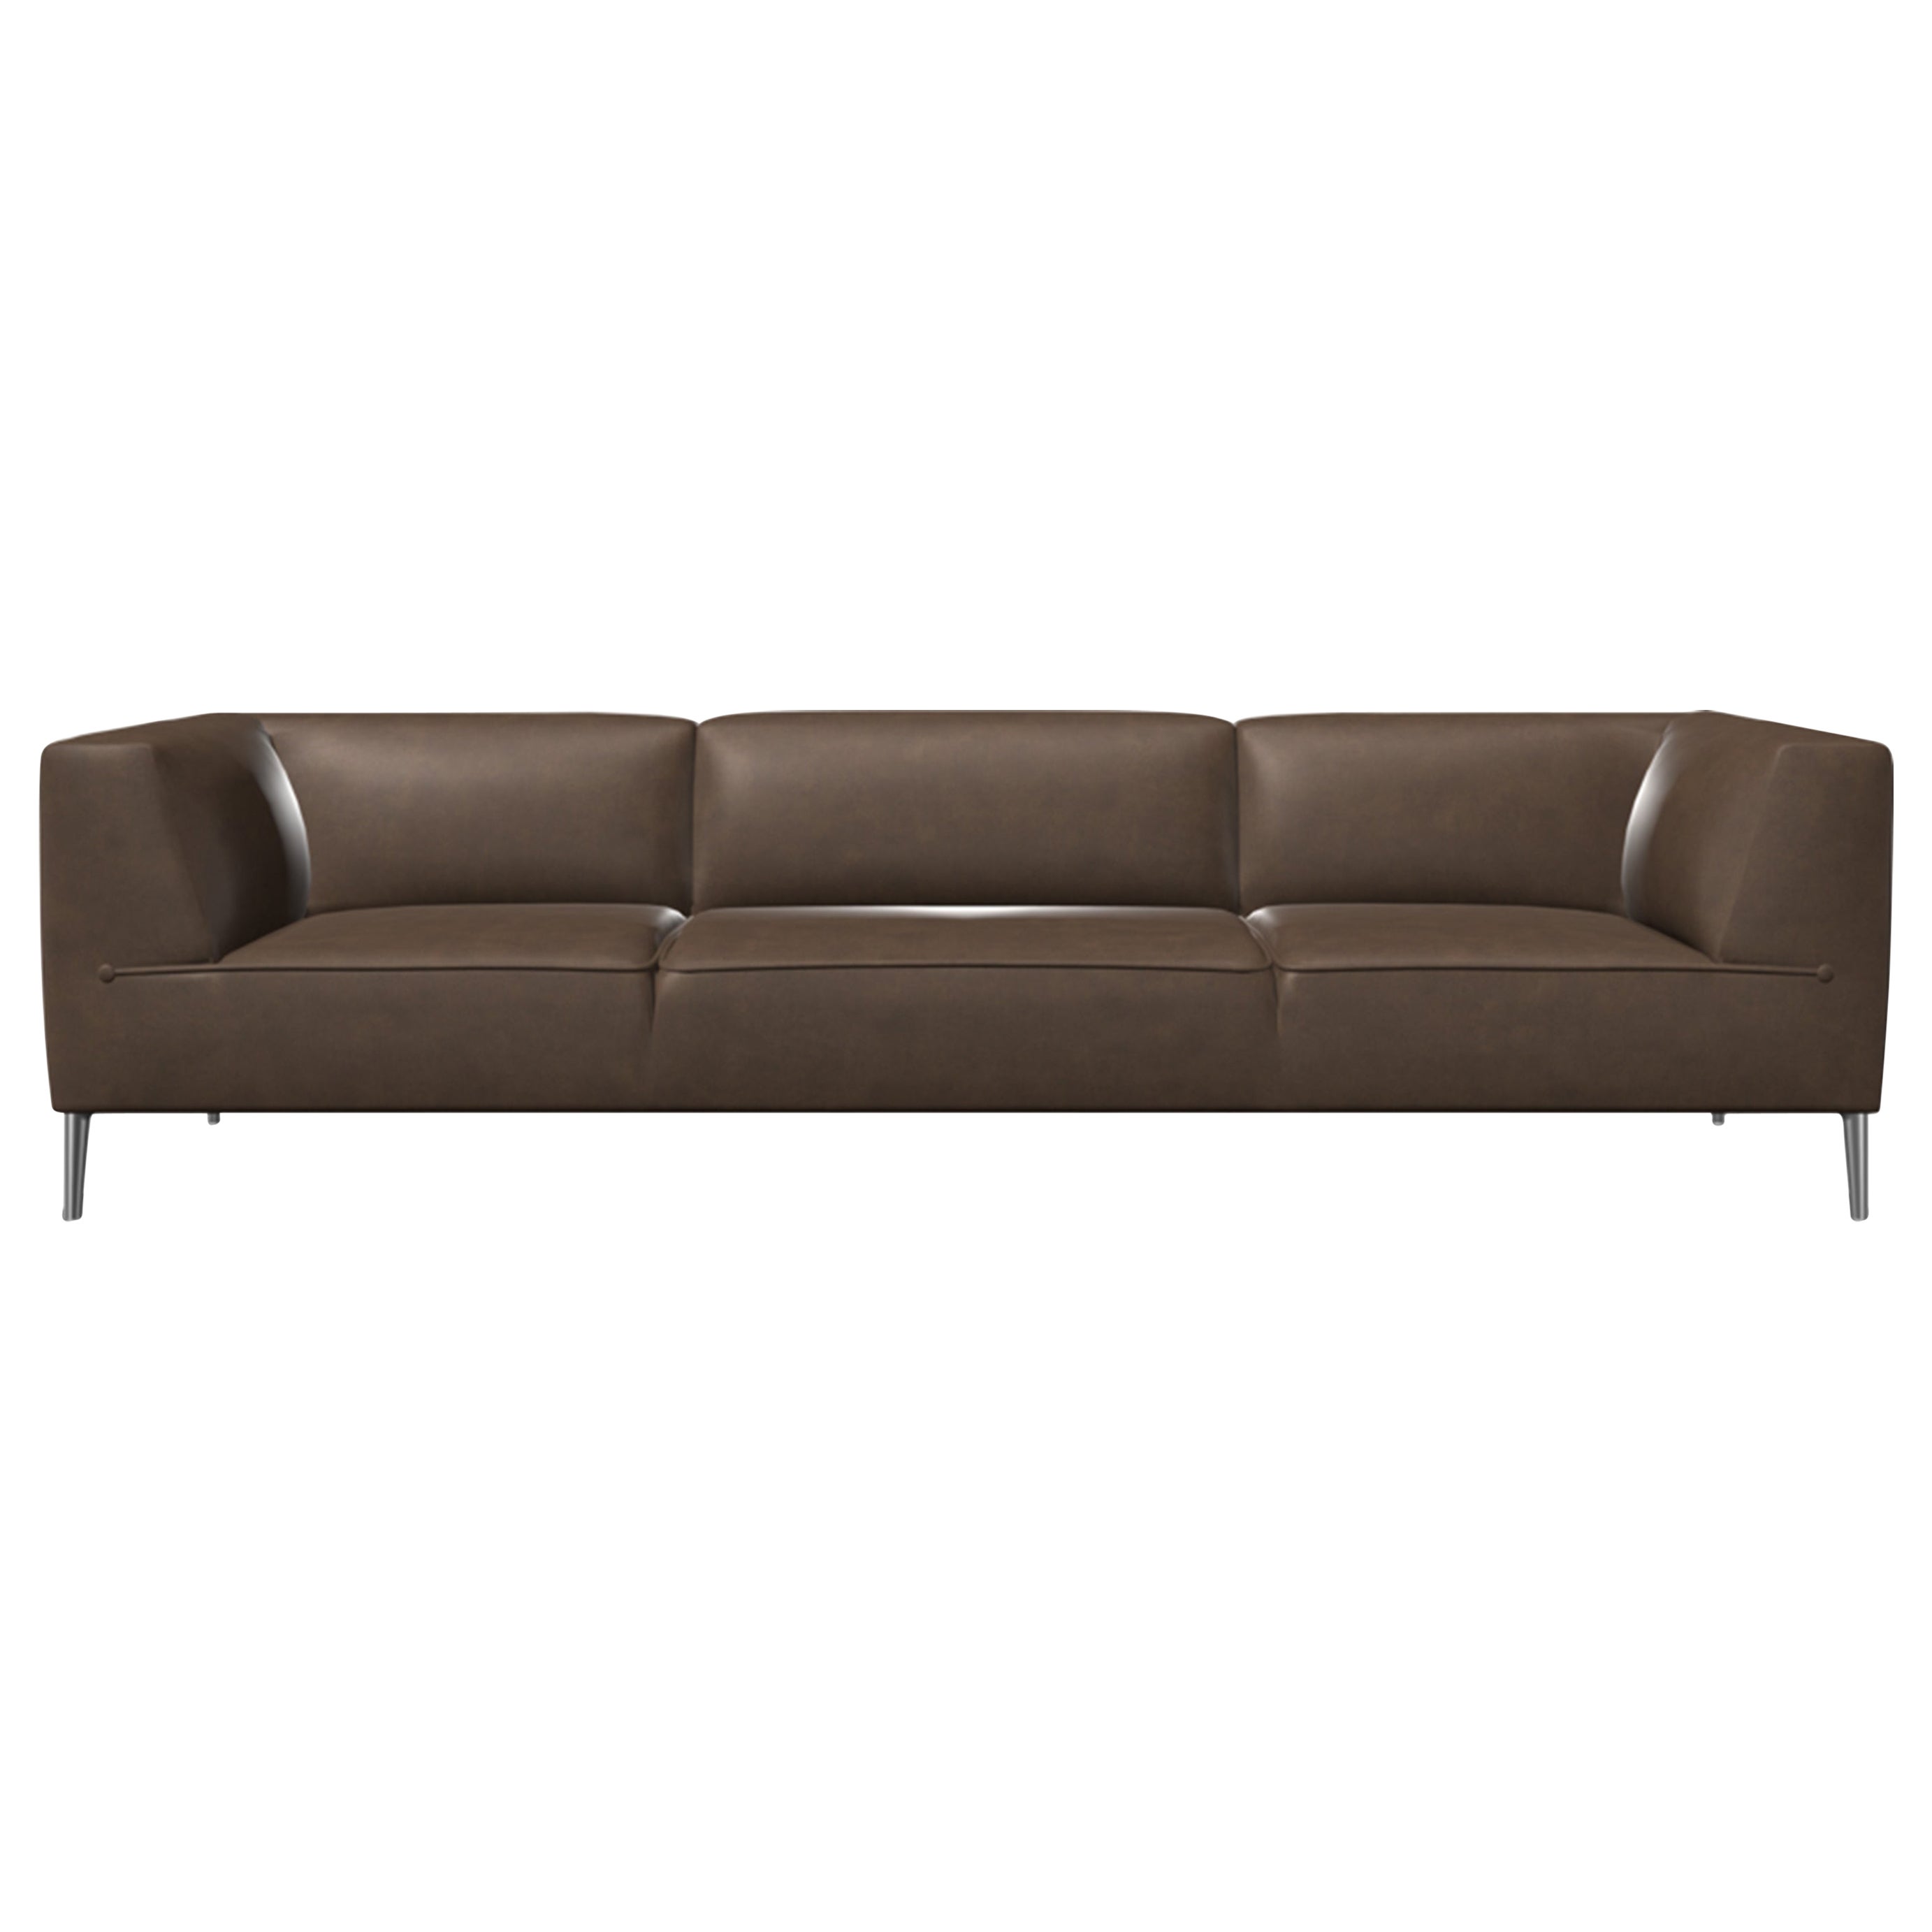 Moooi Triple Seat Sofa So Good in Taupe Upholstery with Polished Aluminum Feet